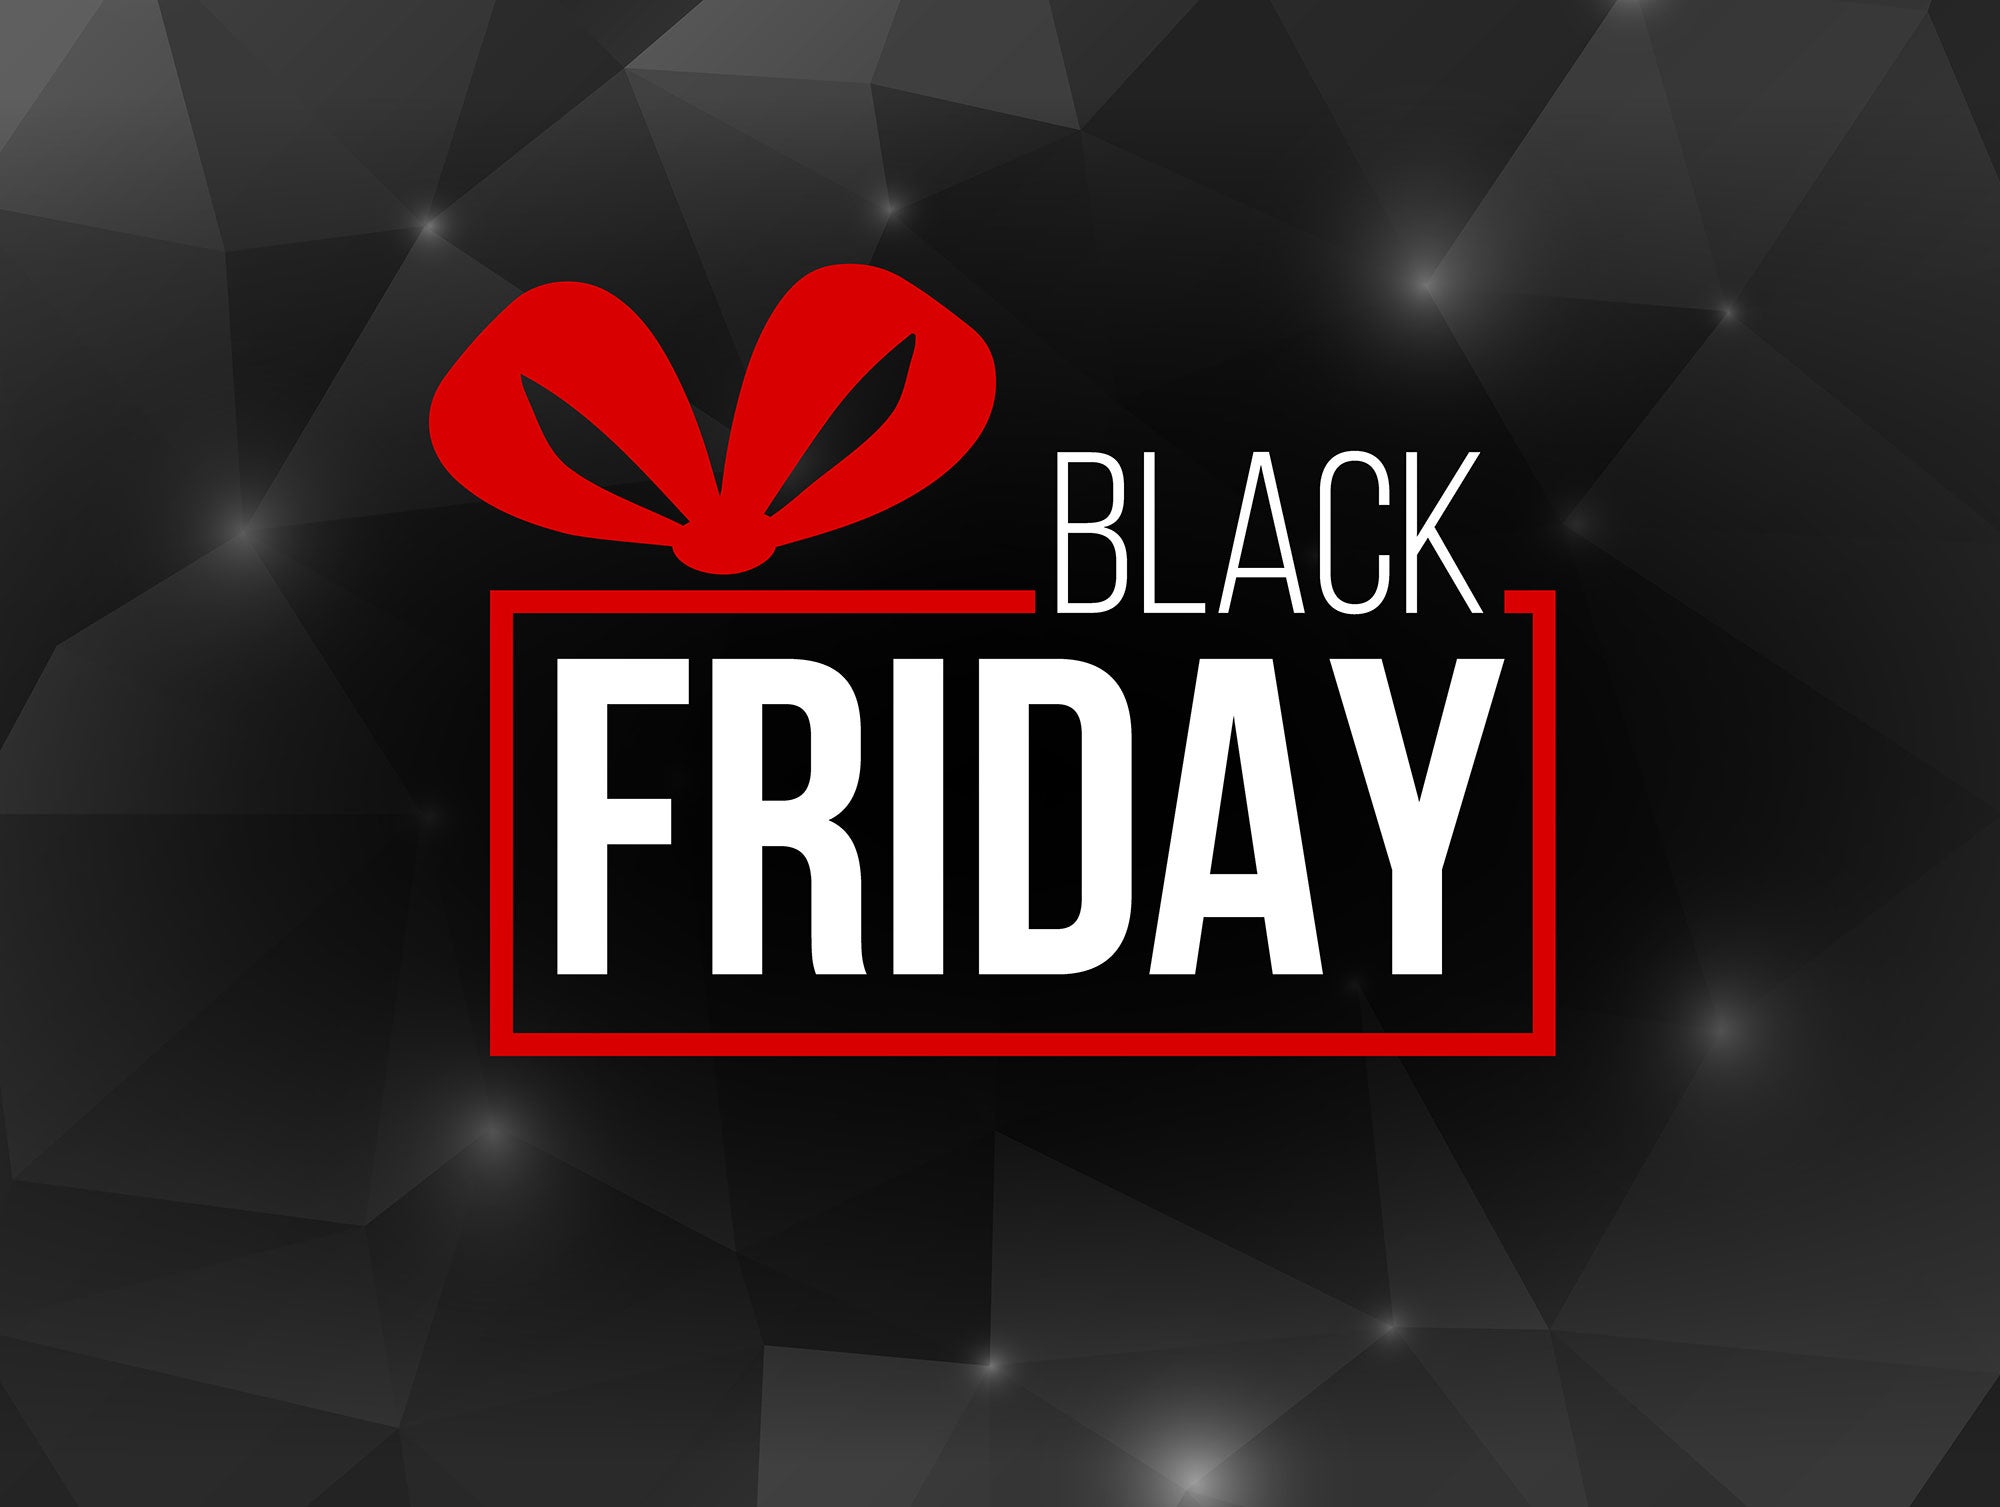 Great Black Friday deals for farmers and rural residents | AGDAILY - What Is The True Purpose Of Black Friday